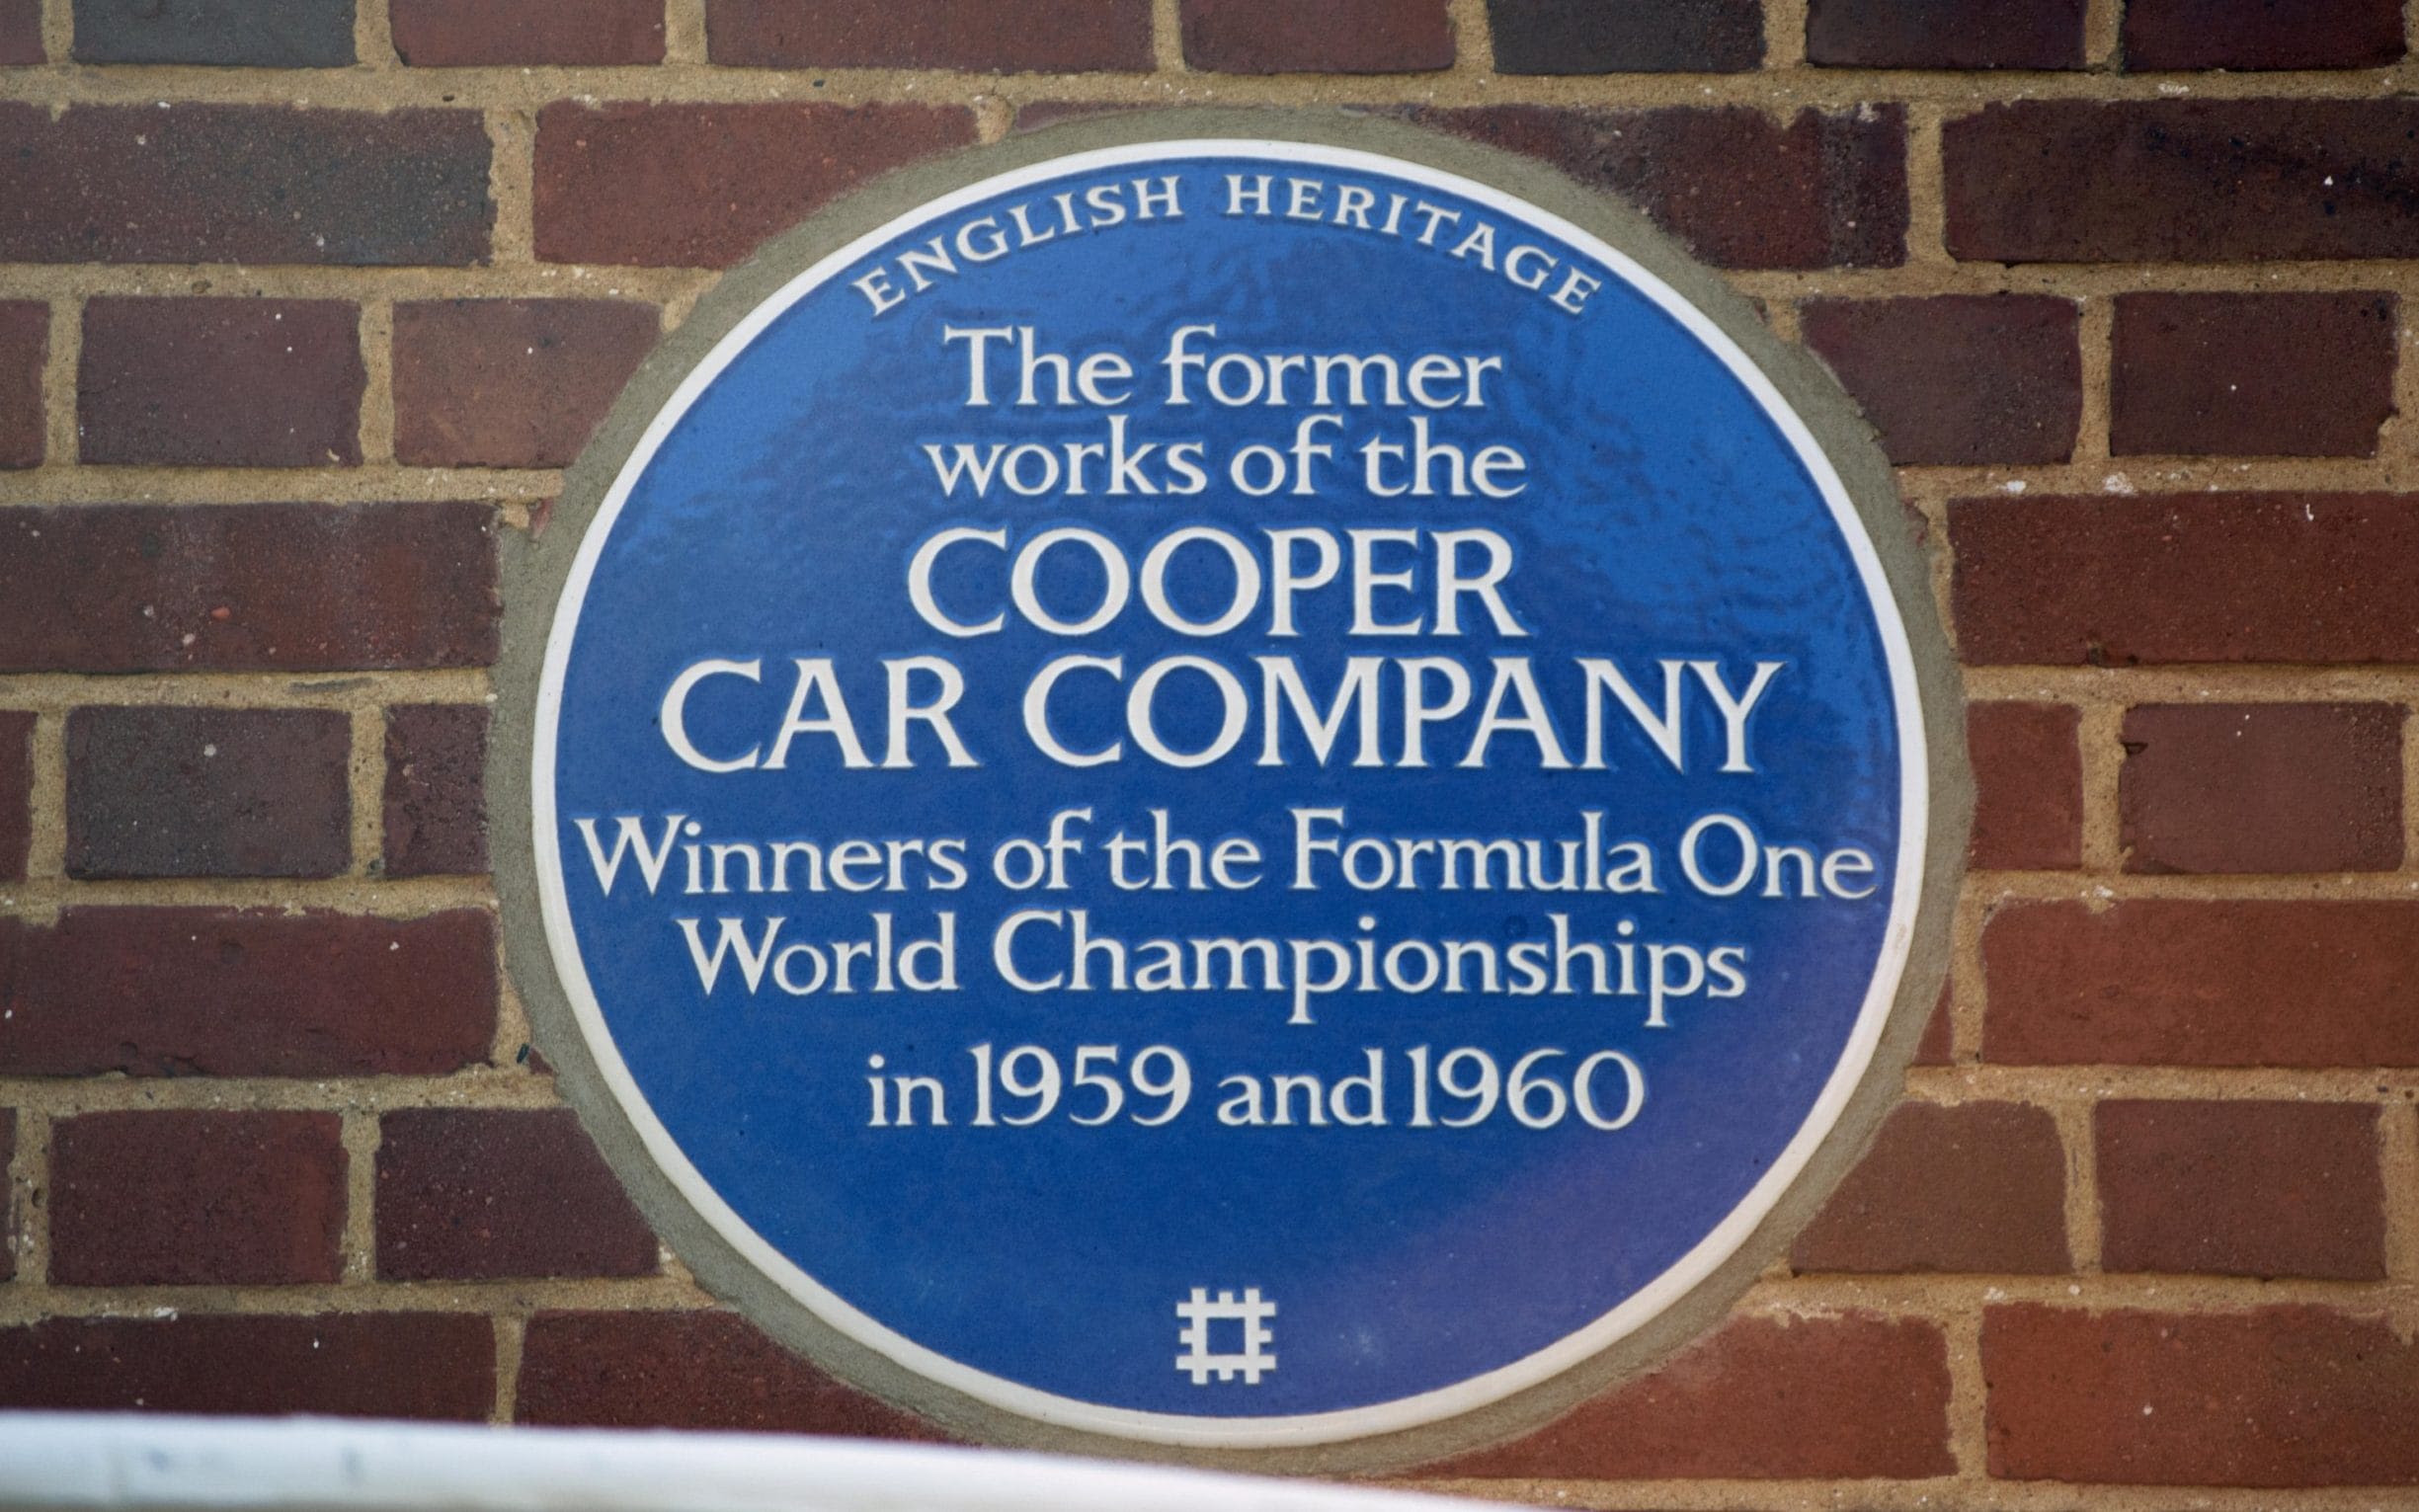 Great motoring exploits and achievements remembered with blue plaques